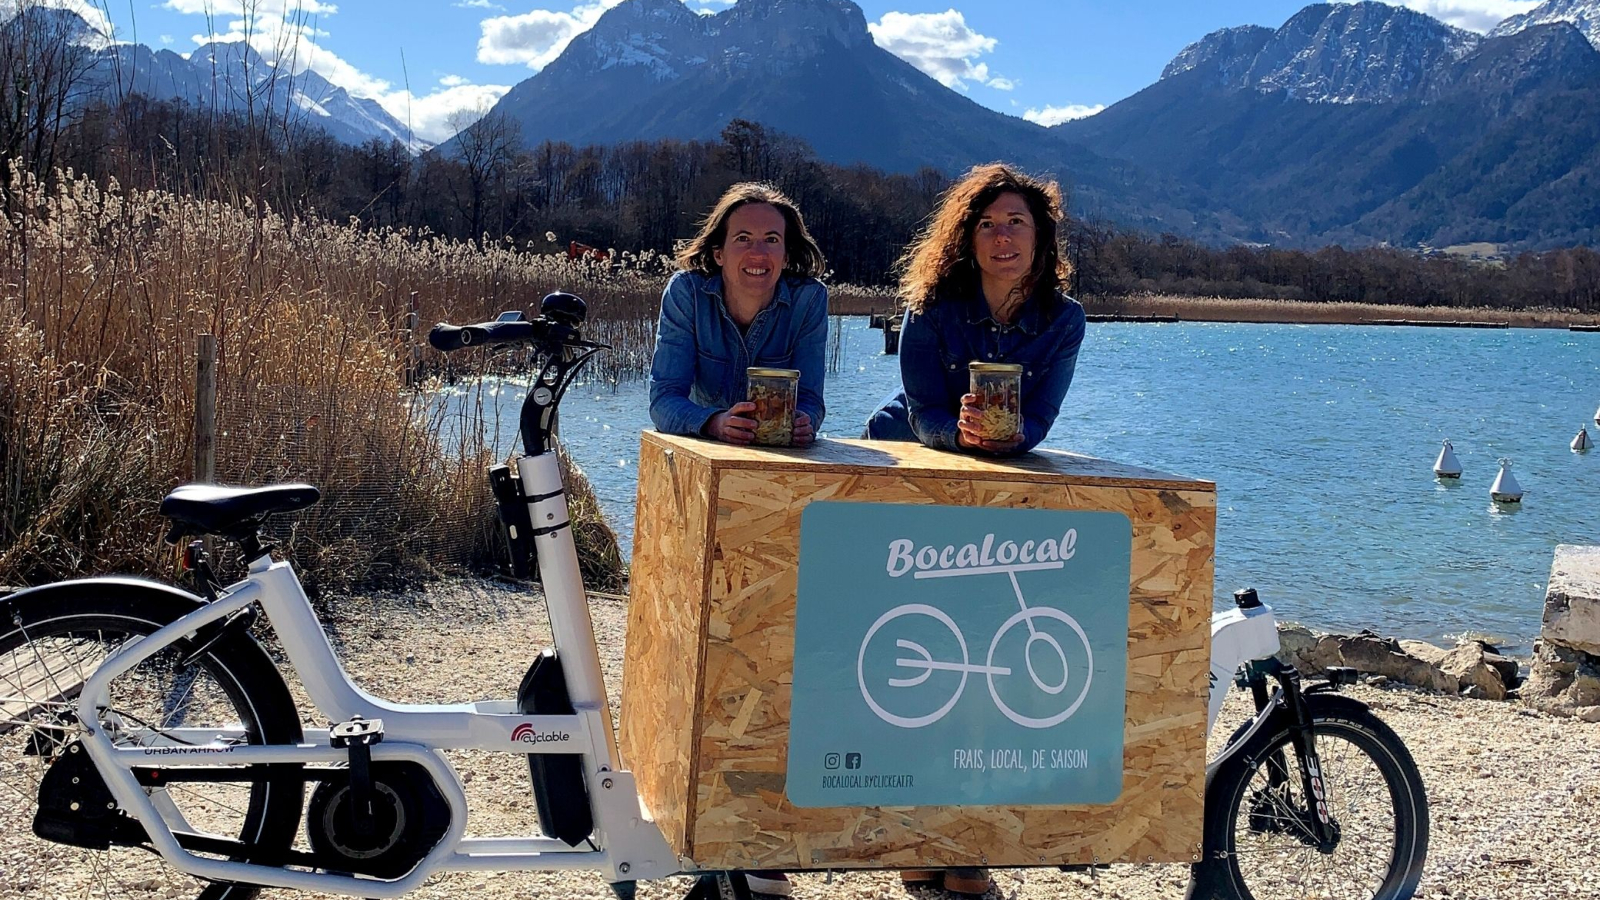 Lorie and Alisson Bocalocal managers with their food bike by the lake